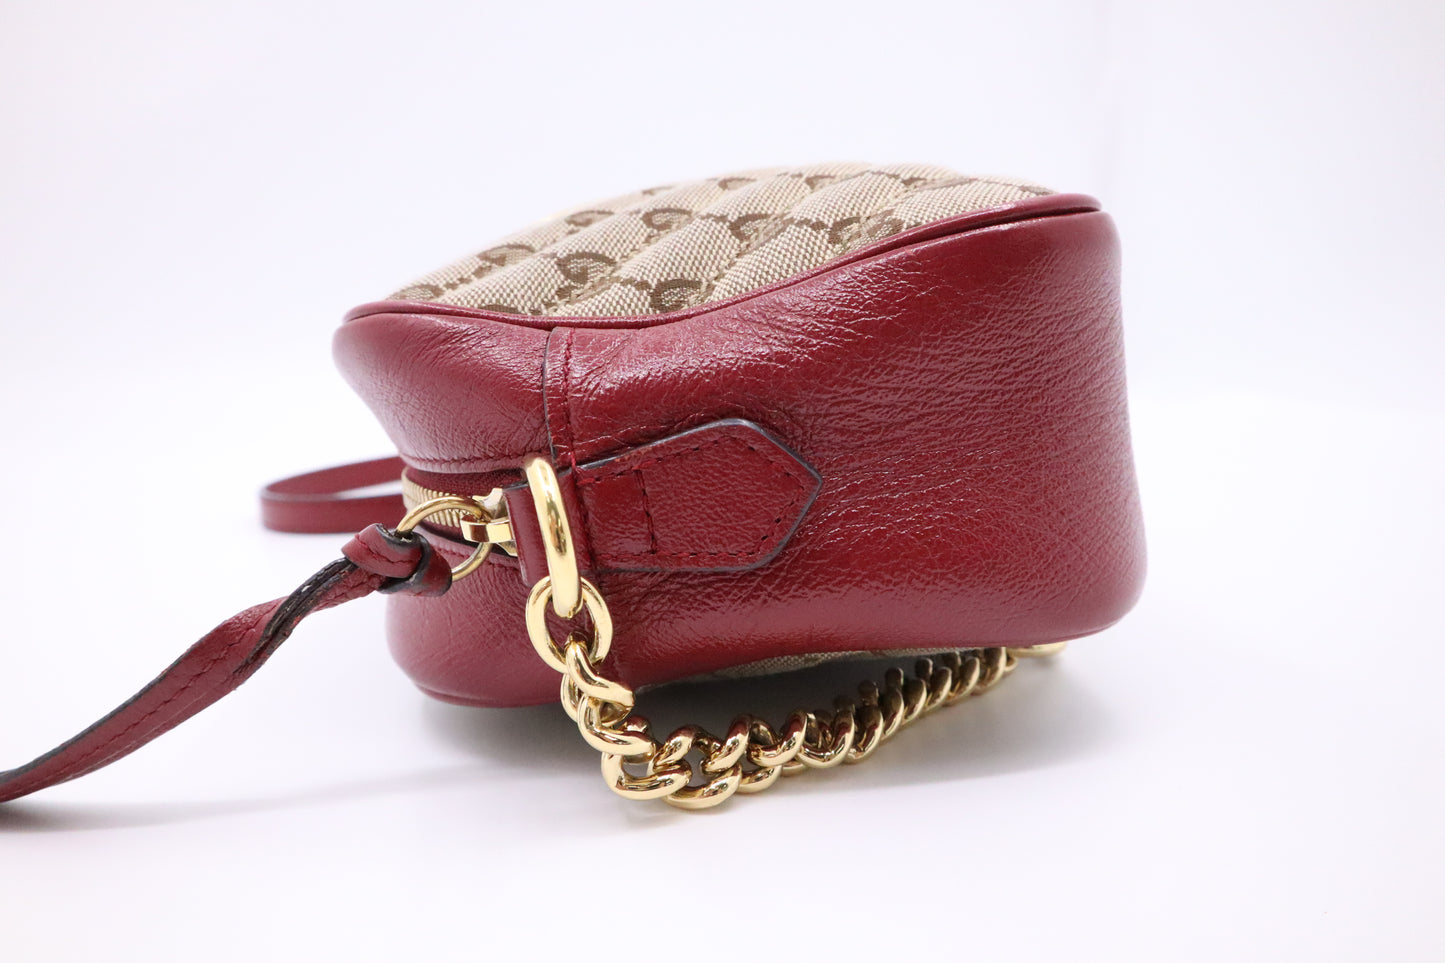 Gucci Marmont Crossbody Bag in Brown GG Canvas and Red Leather